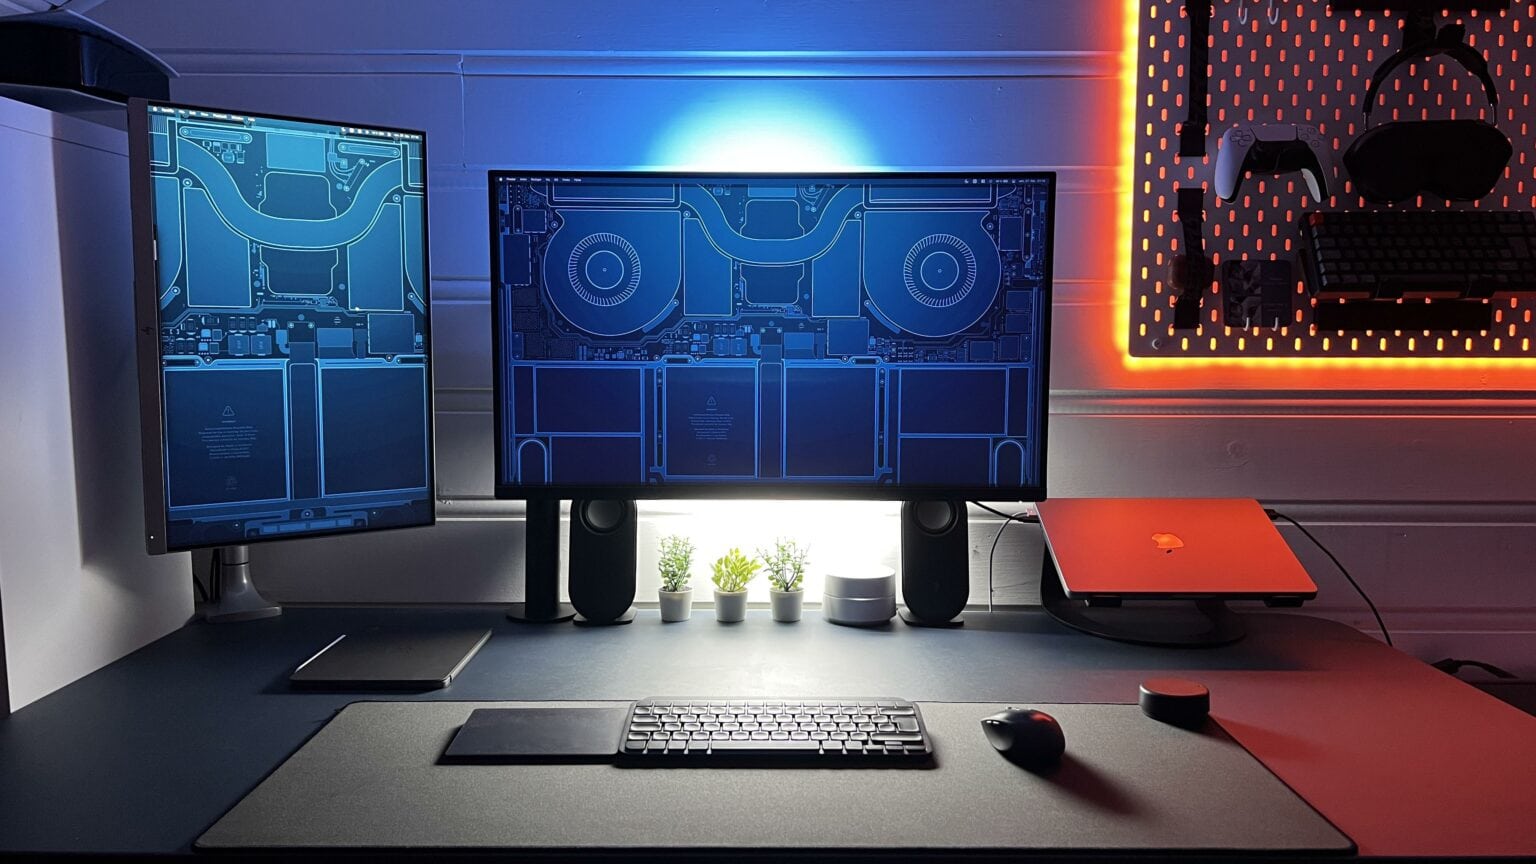 This striking computer setup features very cool wallpaper on the screens.